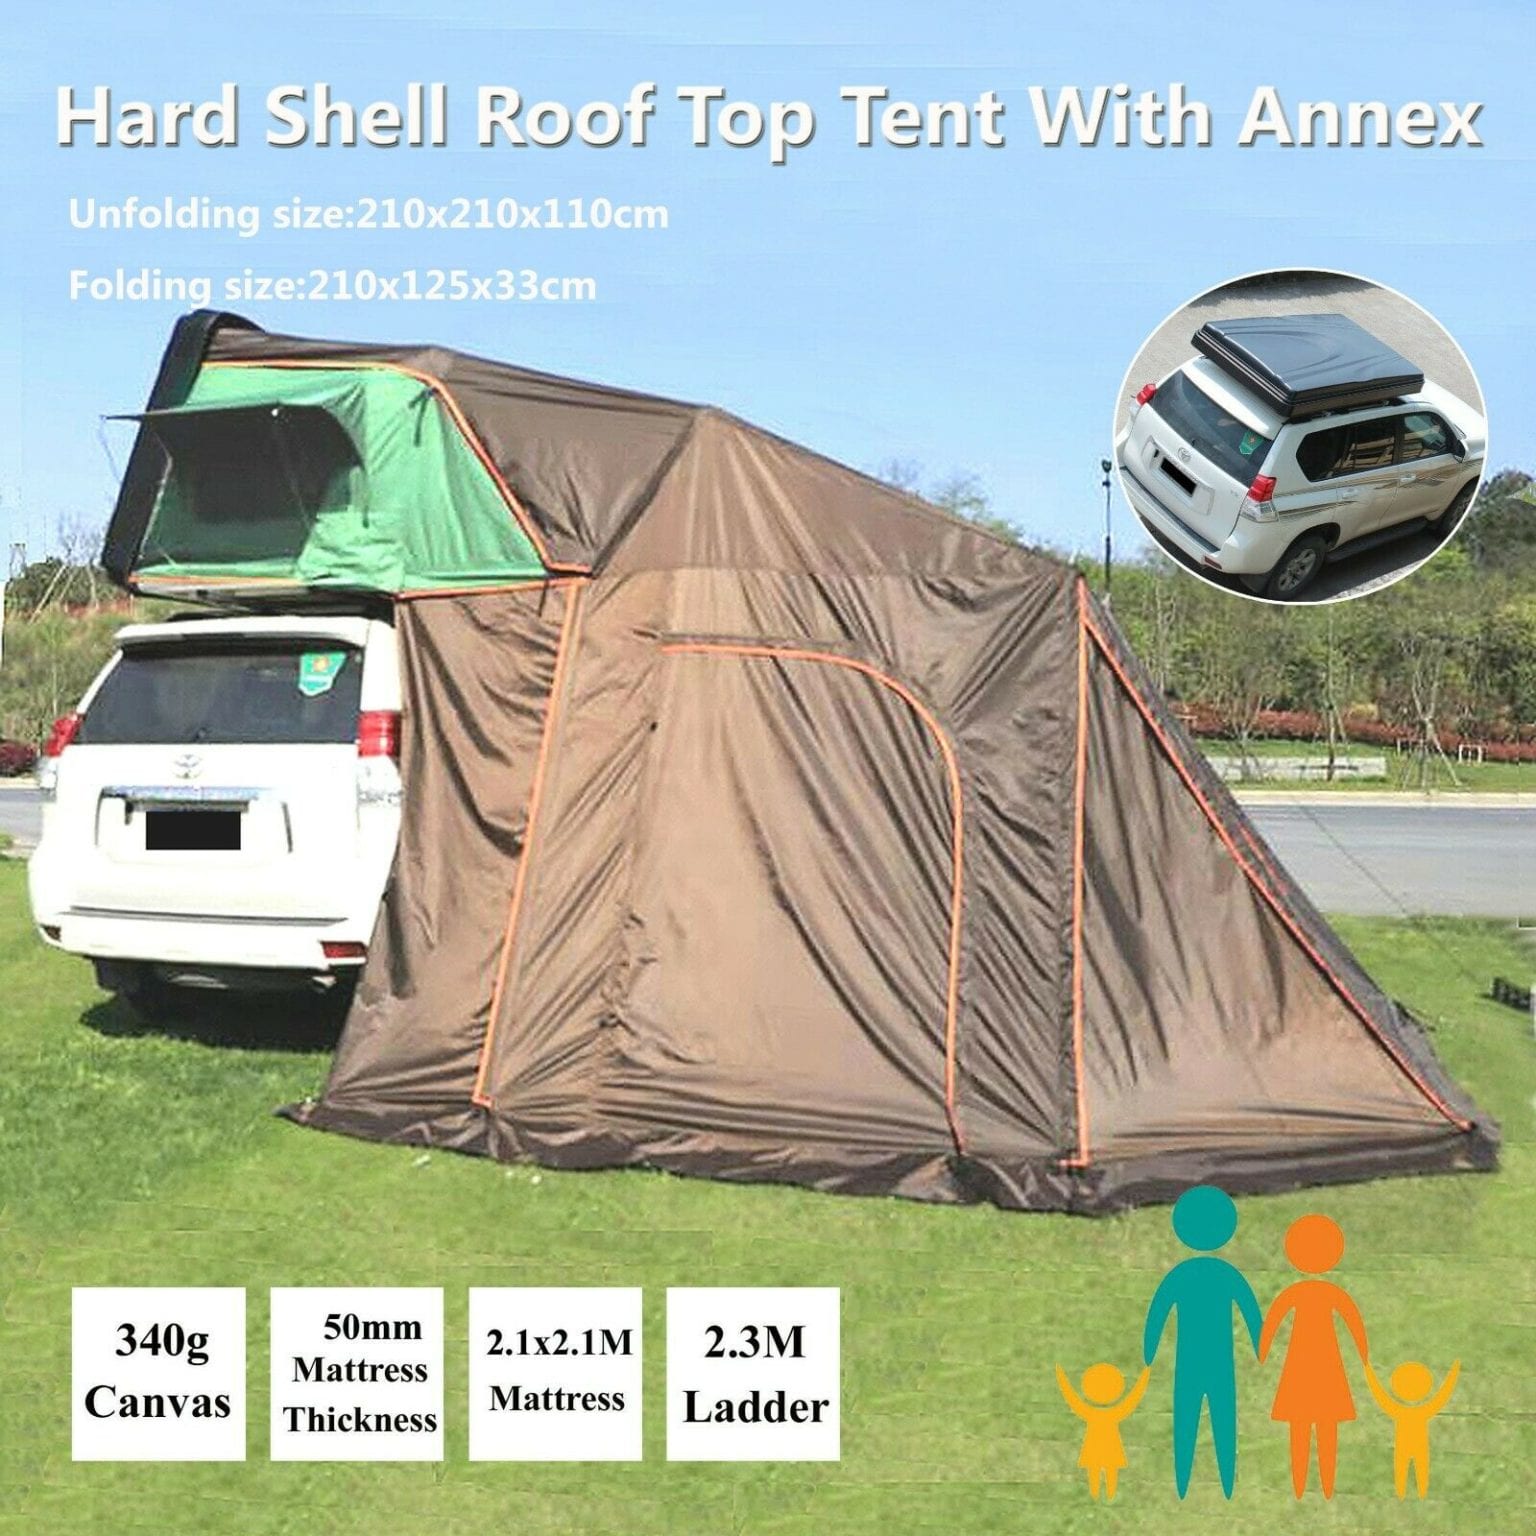 Hard Black Shell Aerodynamic Foldable Roof Top Tent Camping Rooftop 2 ...